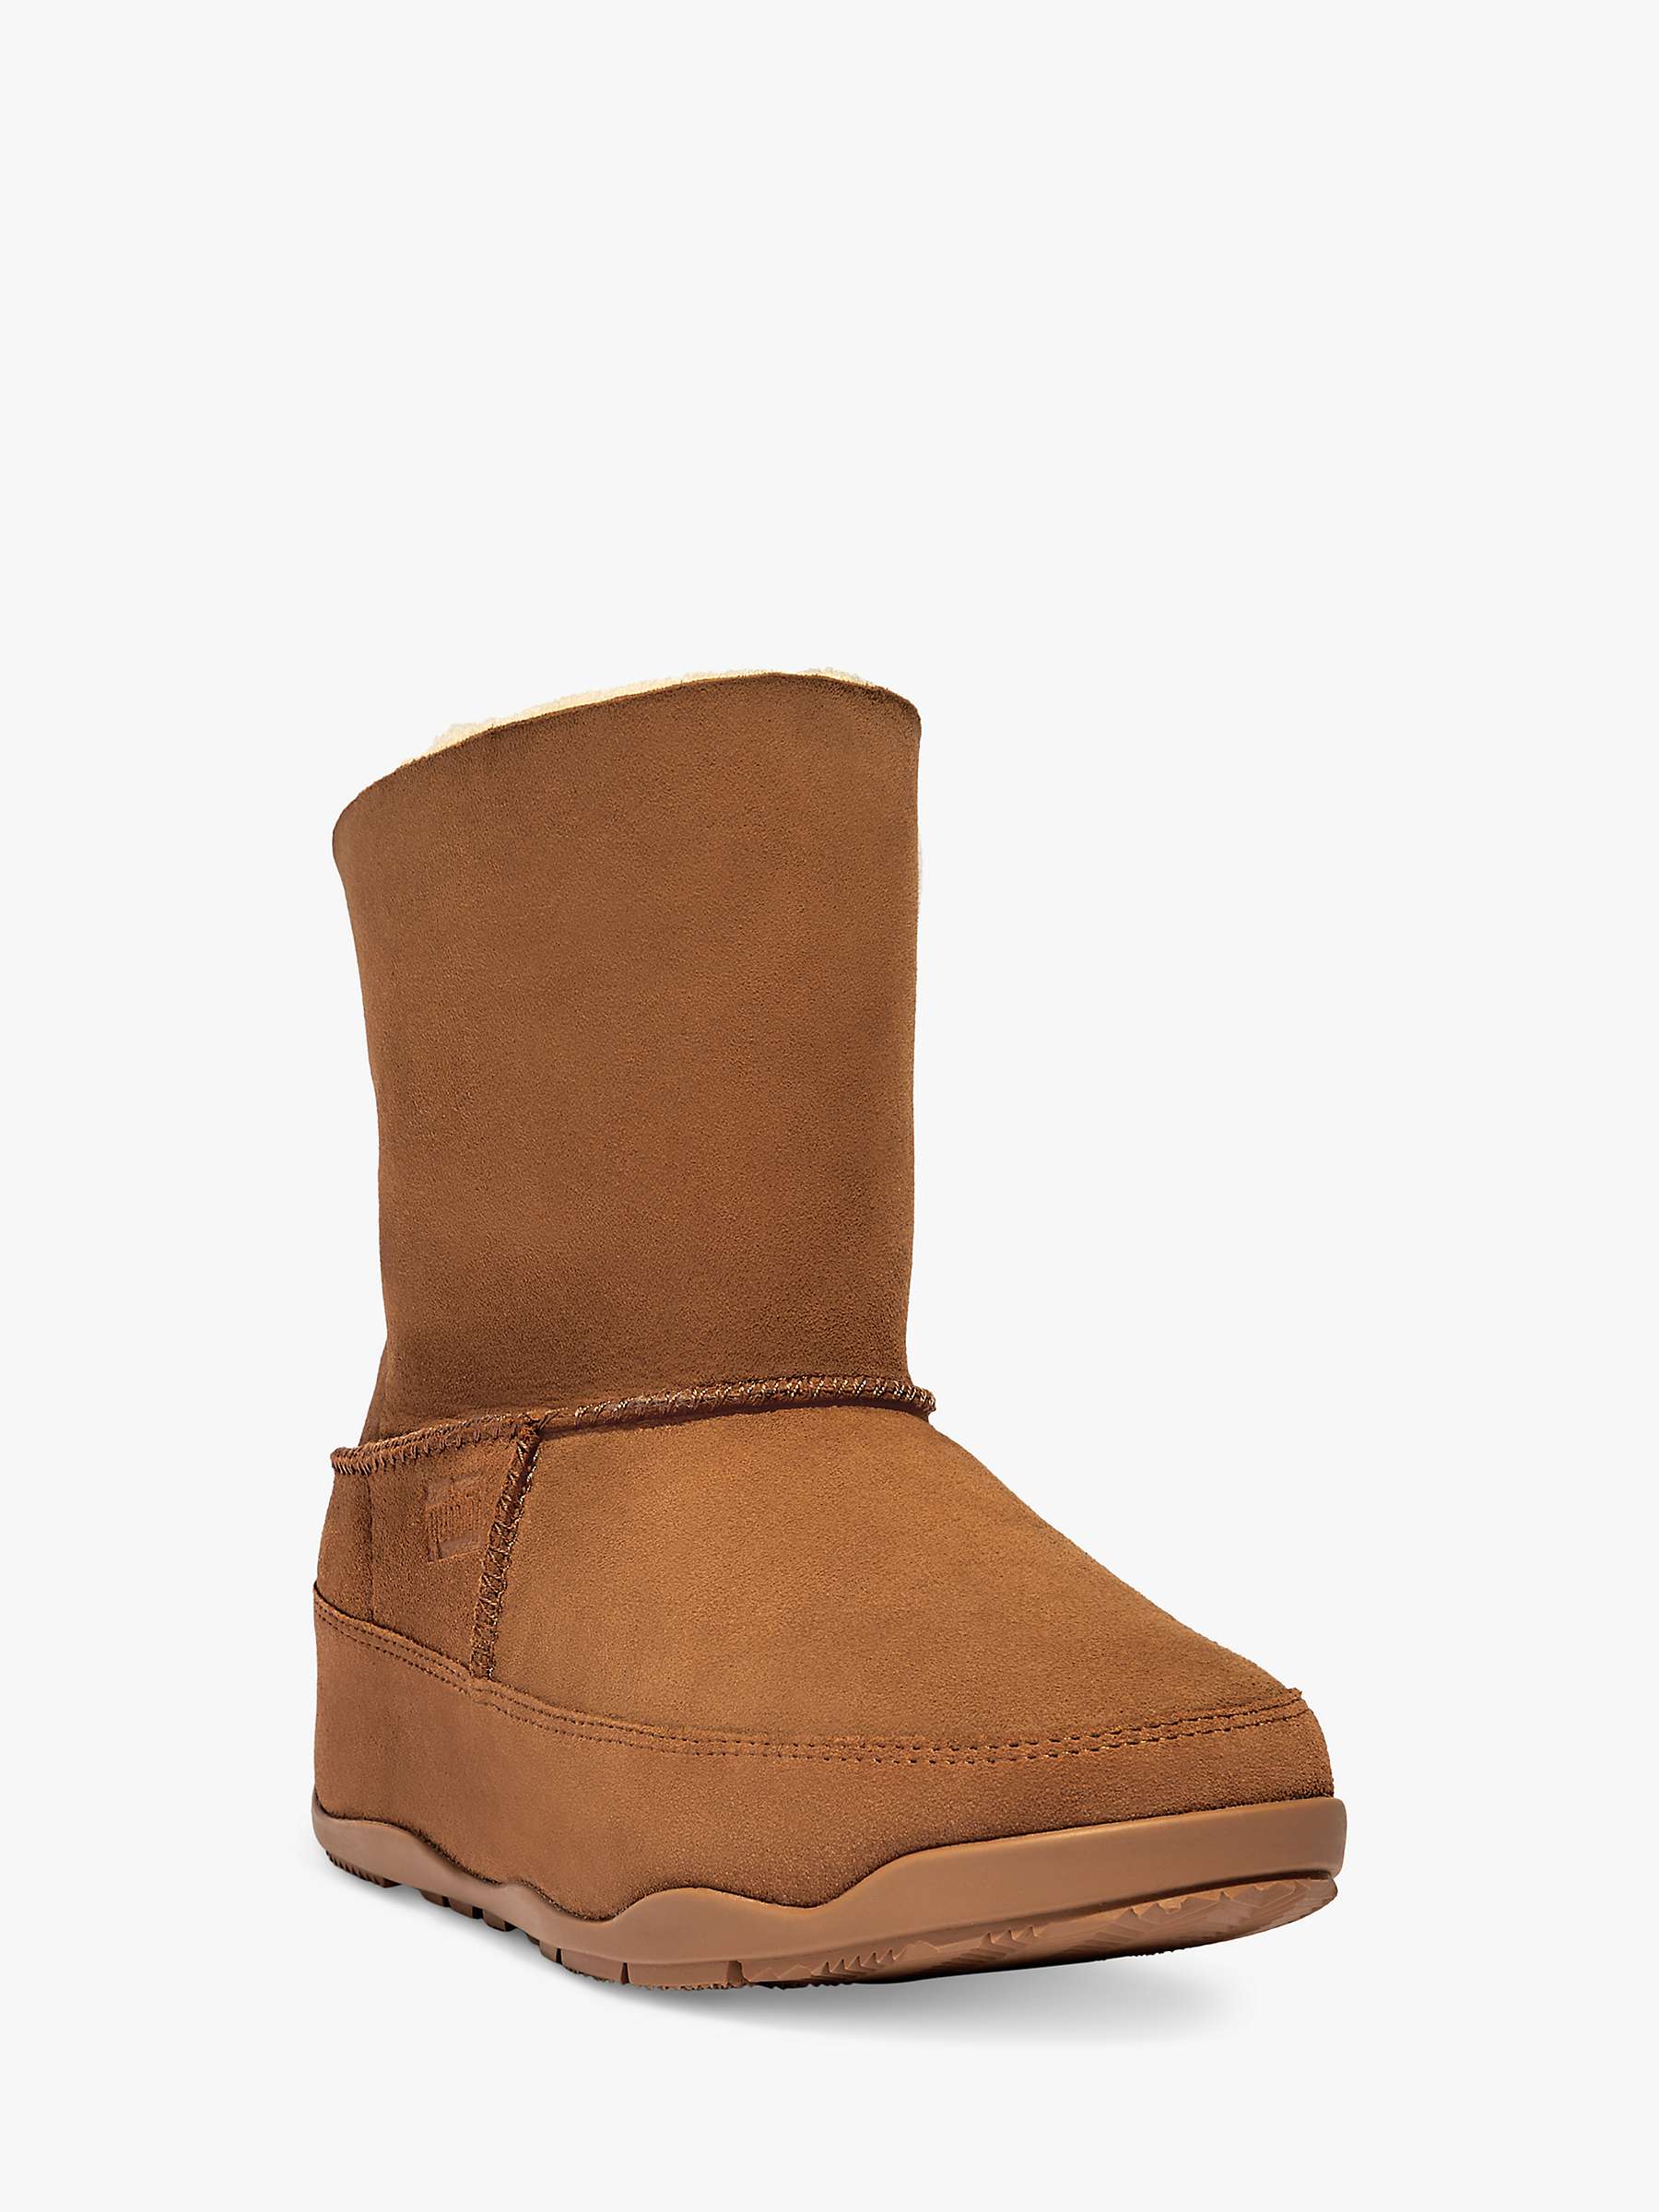 Buy FitFlop Mukluk Suede Ankle Boots Online at johnlewis.com